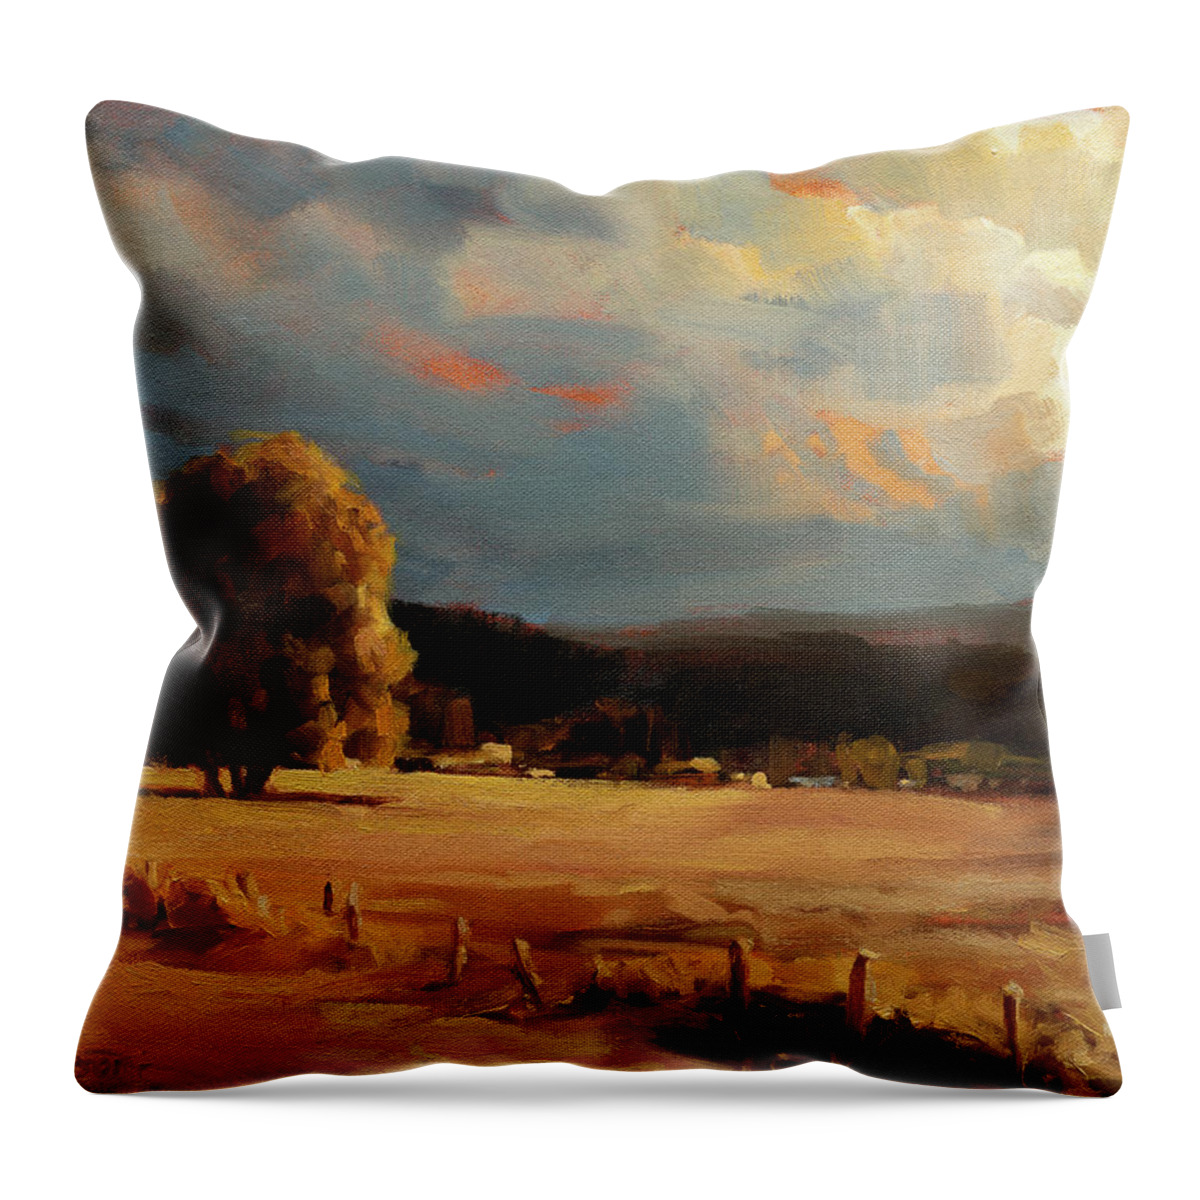 Landscape Throw Pillow featuring the painting Golden Field by Steve Henderson